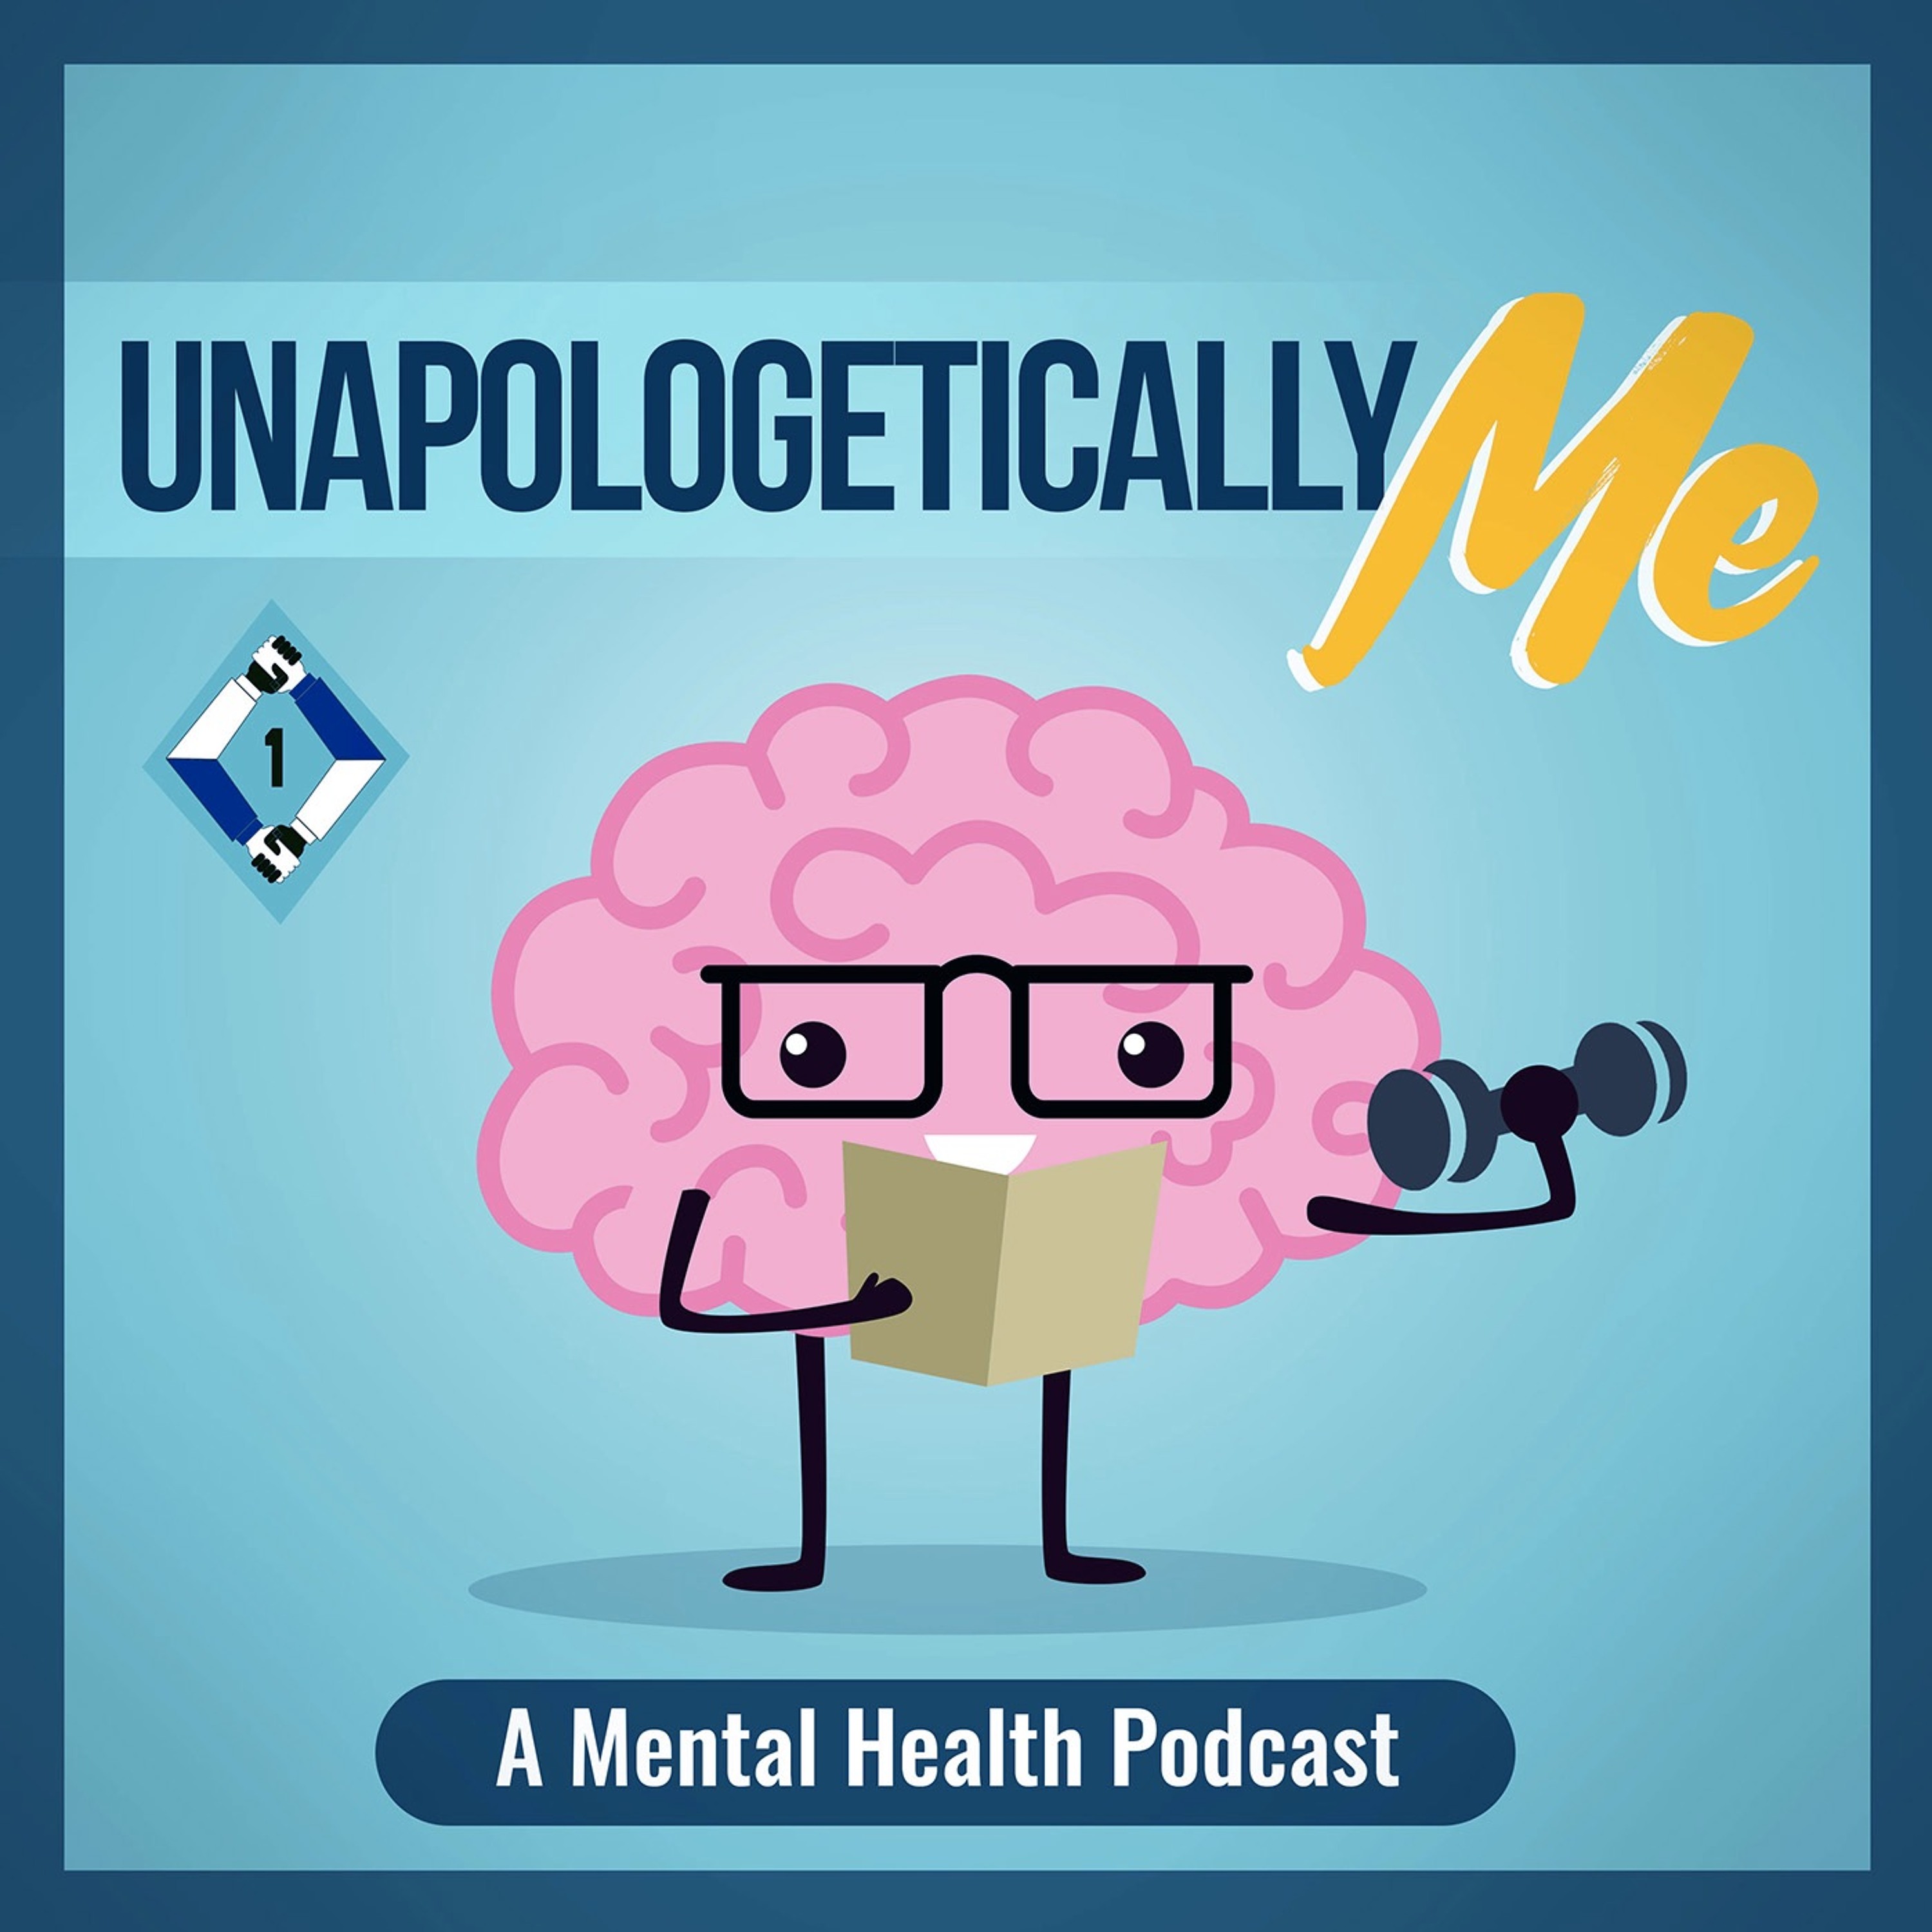 Unapologetically Me: A Mental Health Podcast - Understanding The Human Brain